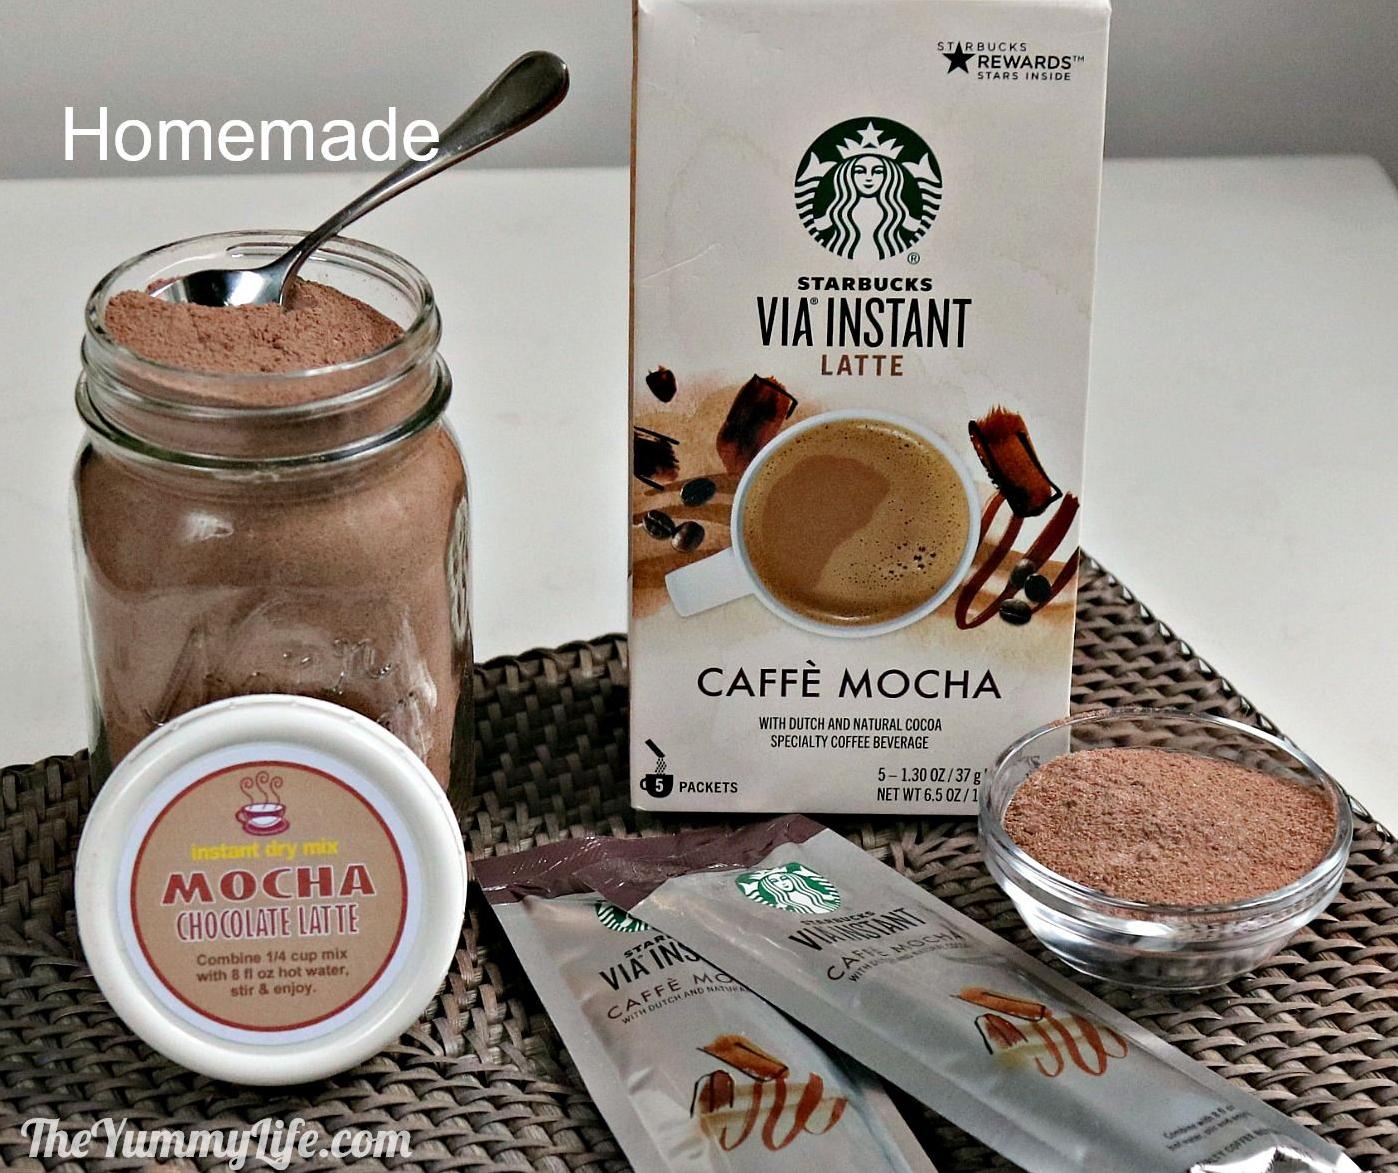  Satisfy your coffee and chocolate cravings with this Instant Cafe Mocha recipe